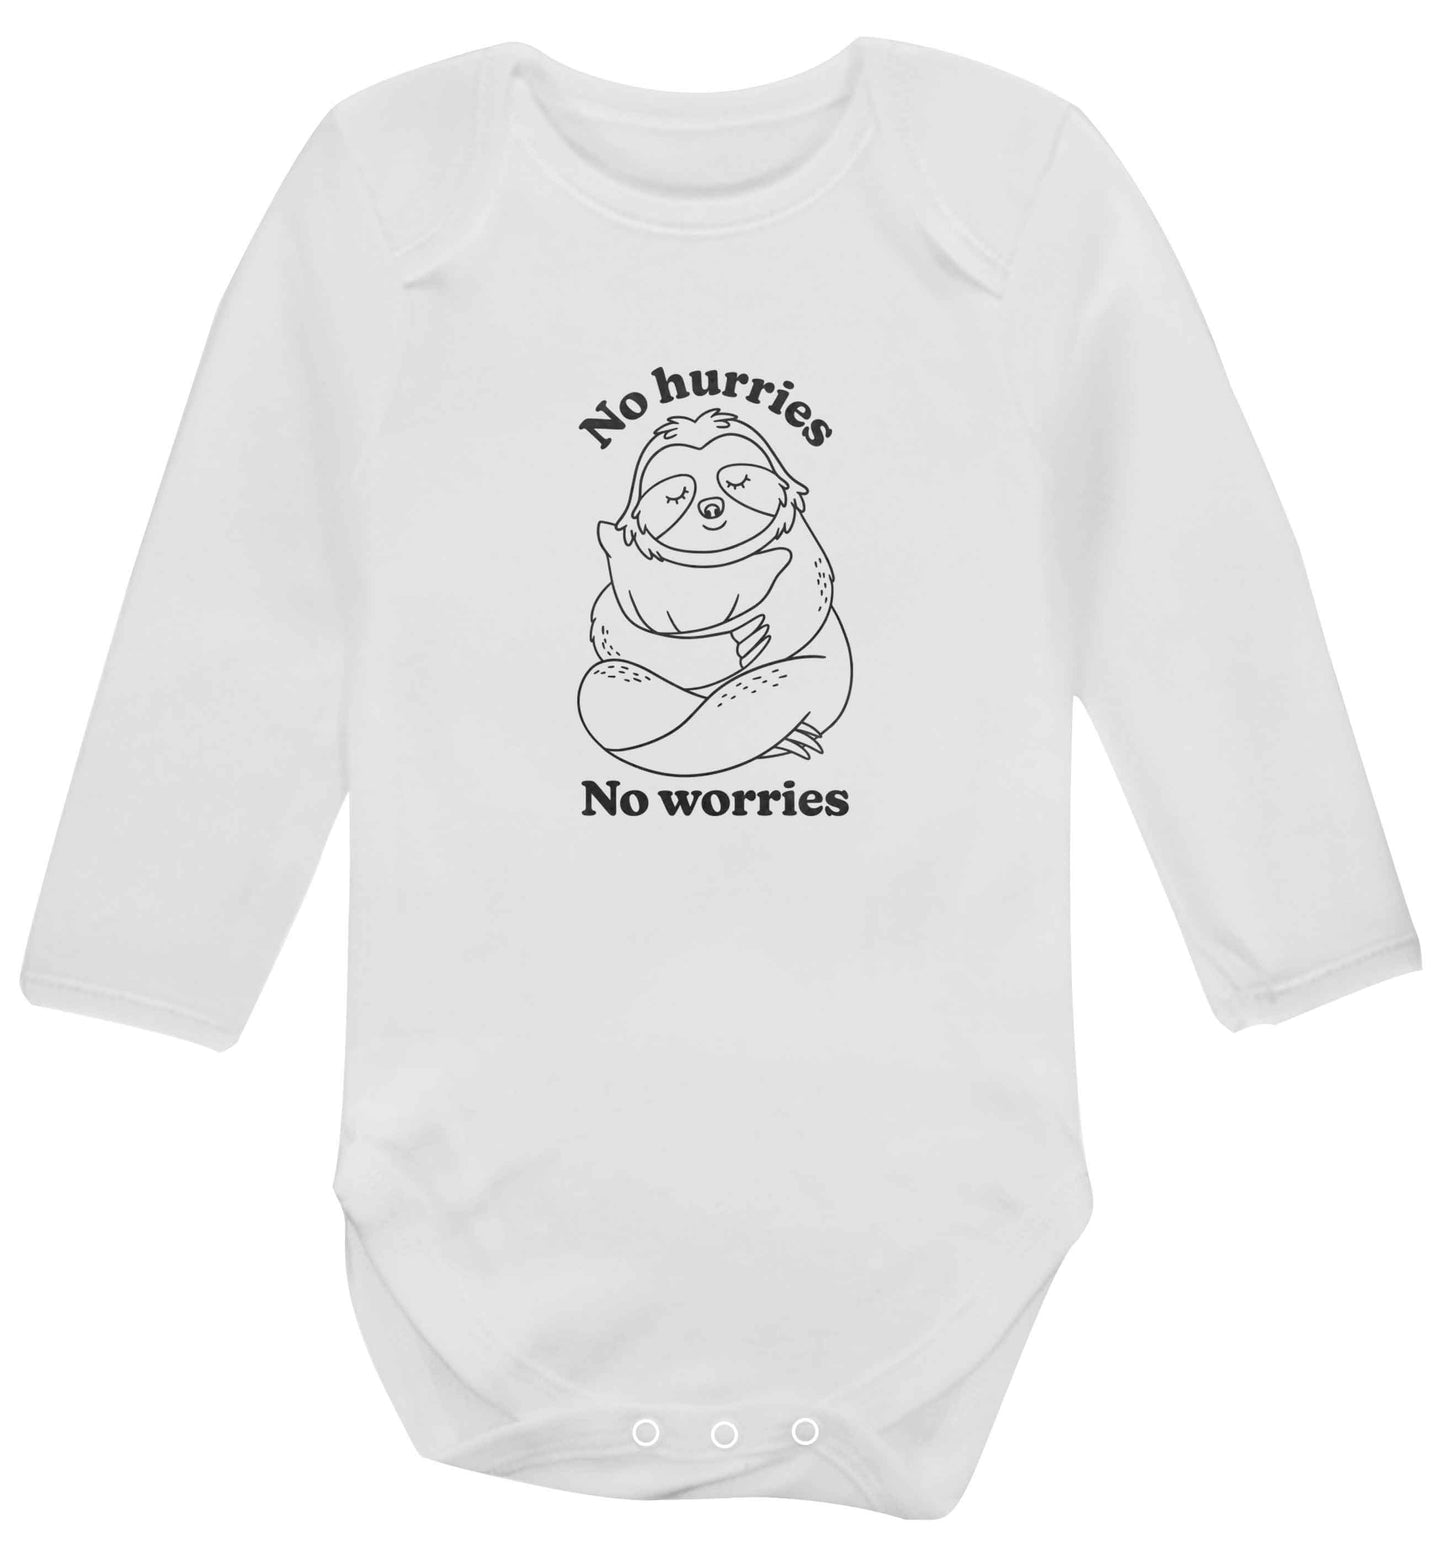 No hurries no worries baby vest long sleeved white 6-12 months